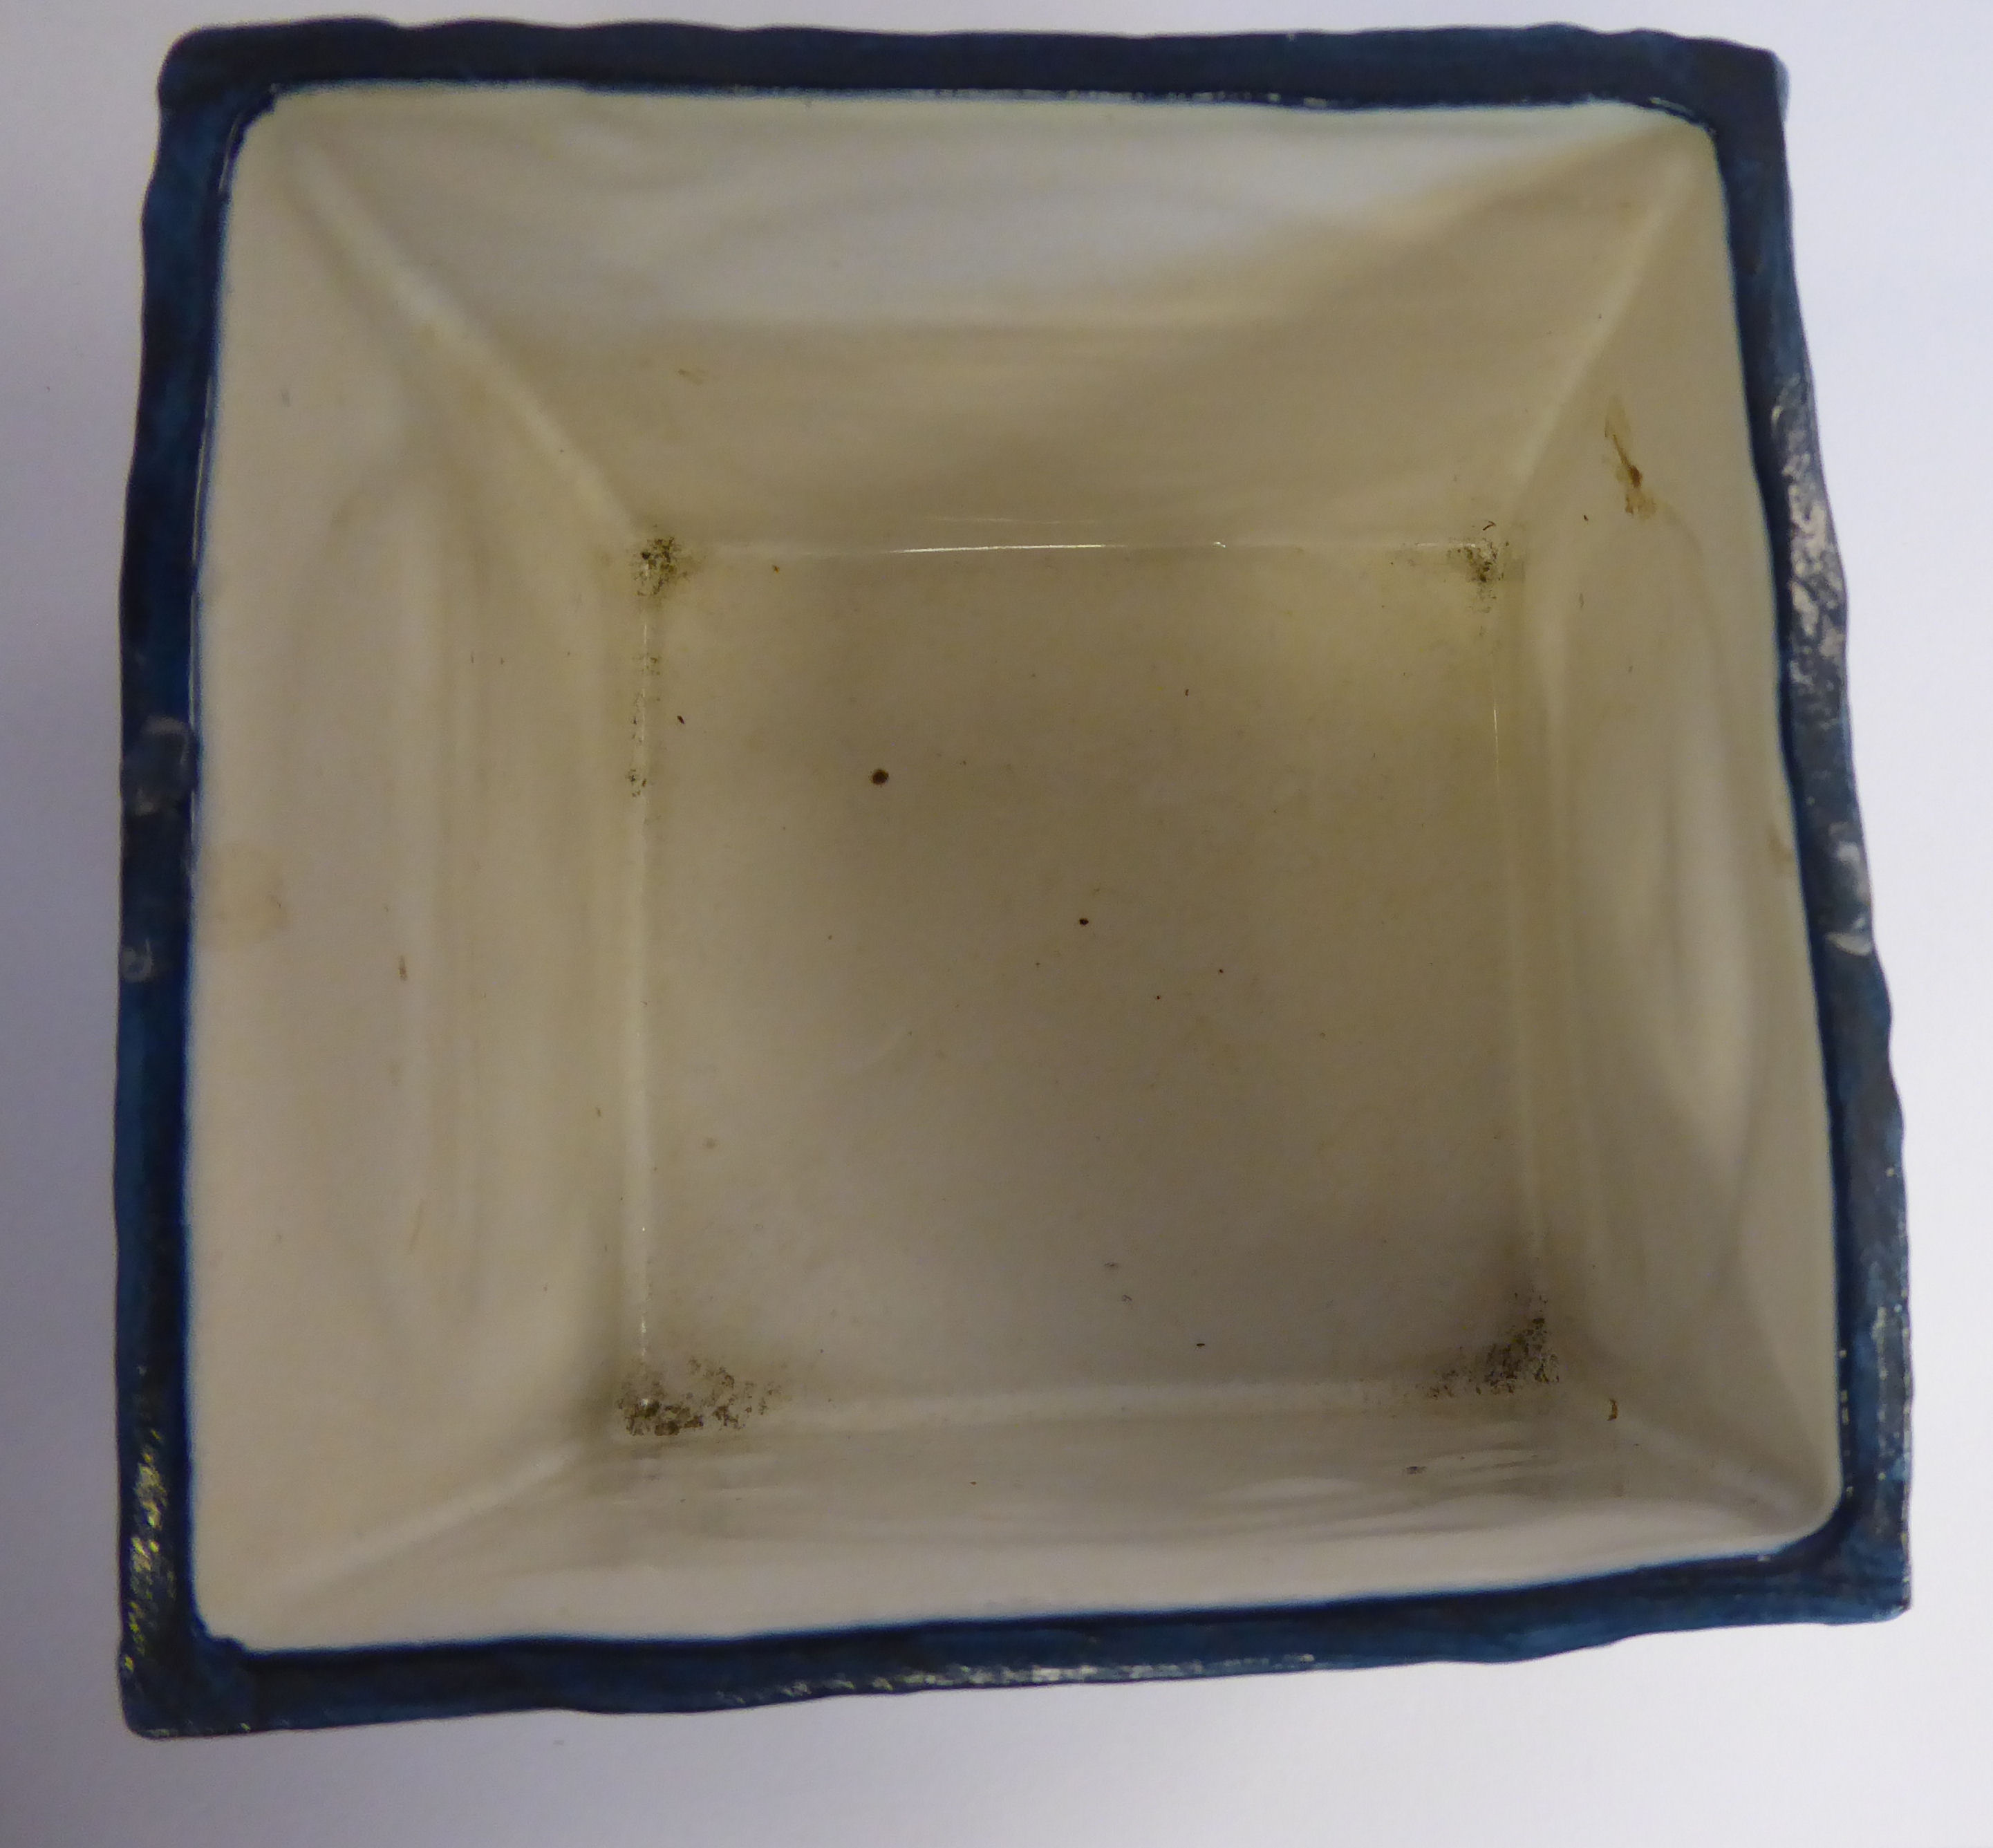 A Troika pottery open, square box vase, - Image 9 of 11